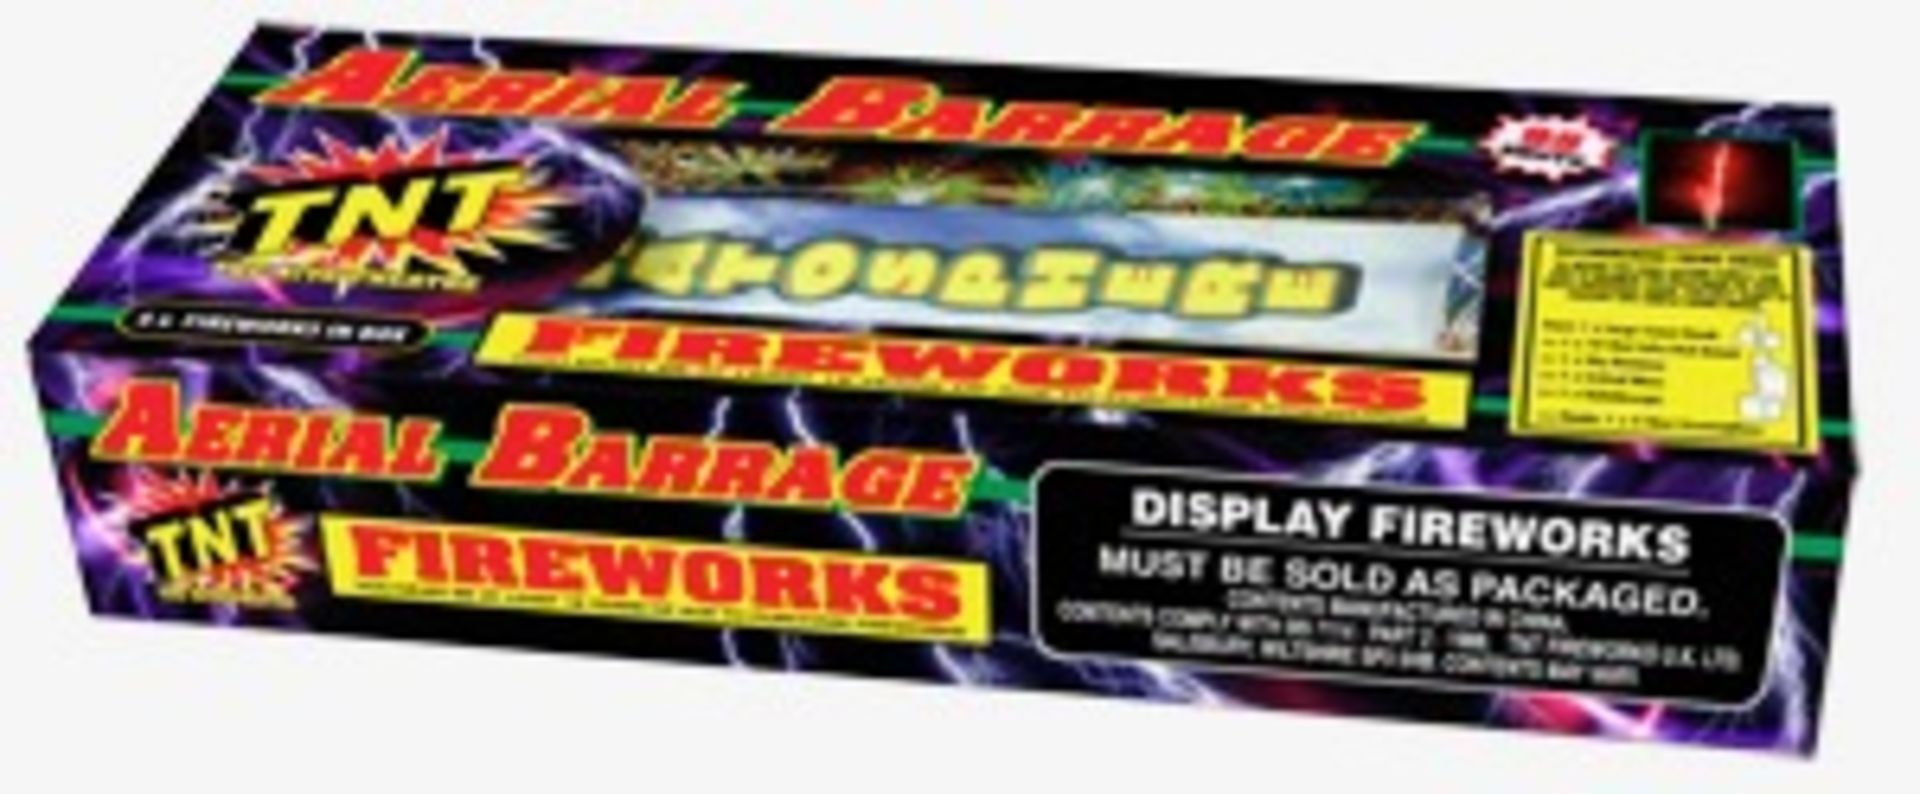 4 x TNT Fireworks - Aerial Barrage 95 Shot Selection Box. Includes 6 high quality fireworks. 1 x - Image 3 of 3